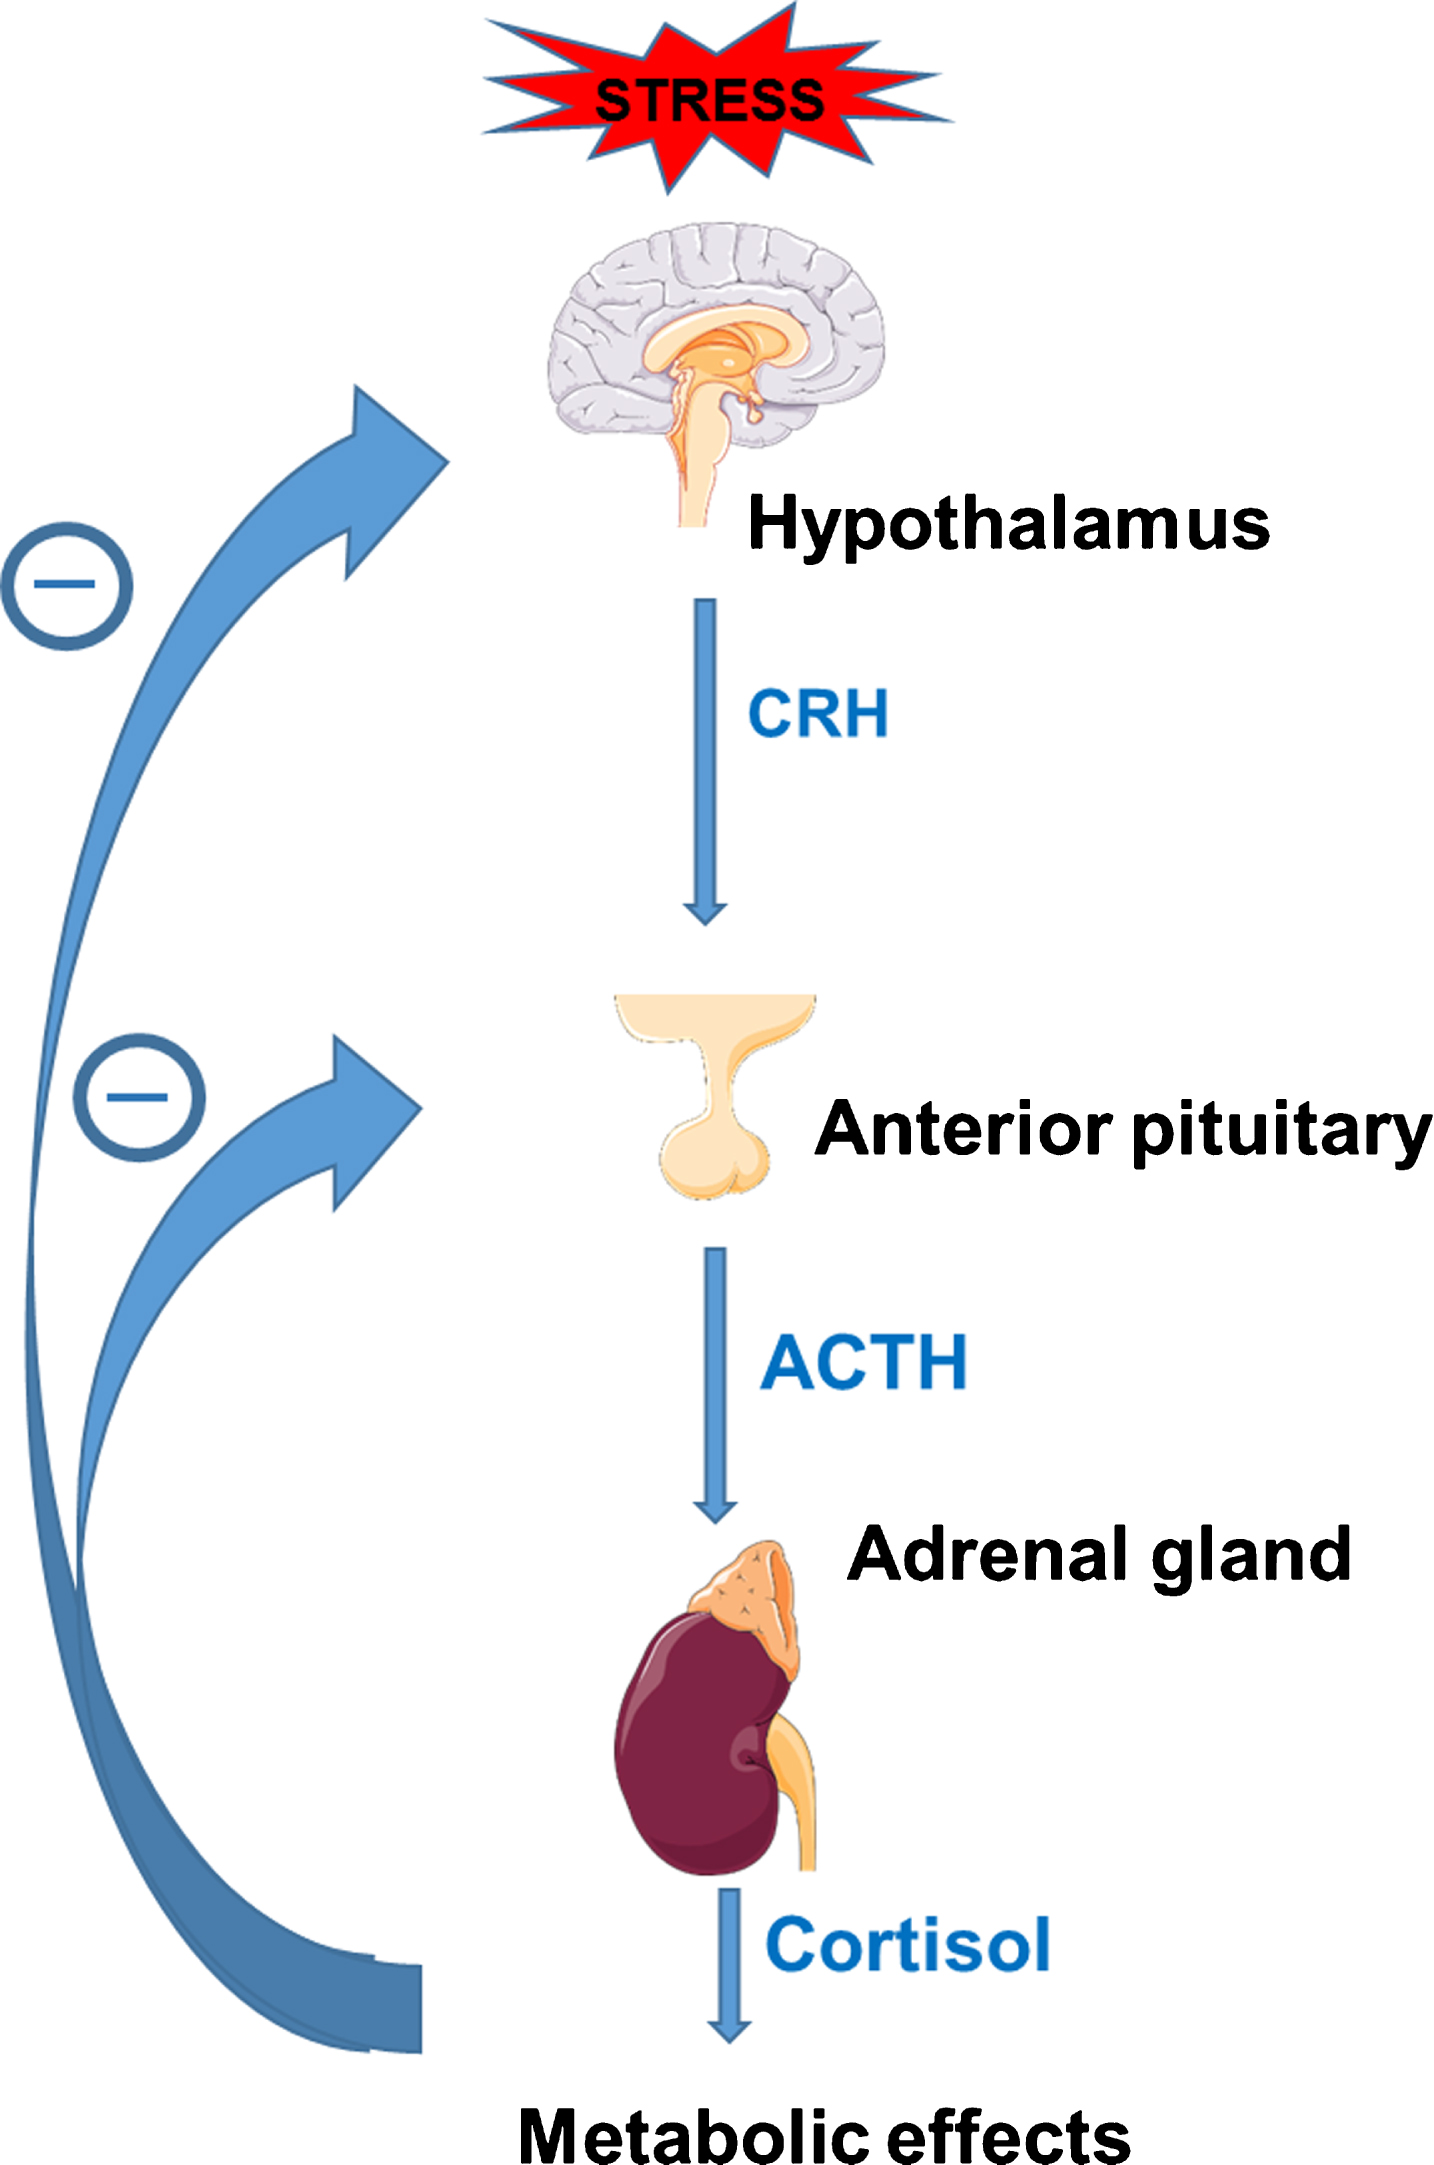 Regulation through cortisol-mediated negative feedback of the hypothalamic-pituitary-adrenal (HPA) axis; CRH = corticotropin-releasing hormone, ACTH = adrenocorticotropin hormone. Figure designed with images from Servier Medical Art (https://smart.servier.com) under a Creative Commons Attribution 3.0 Unported License.